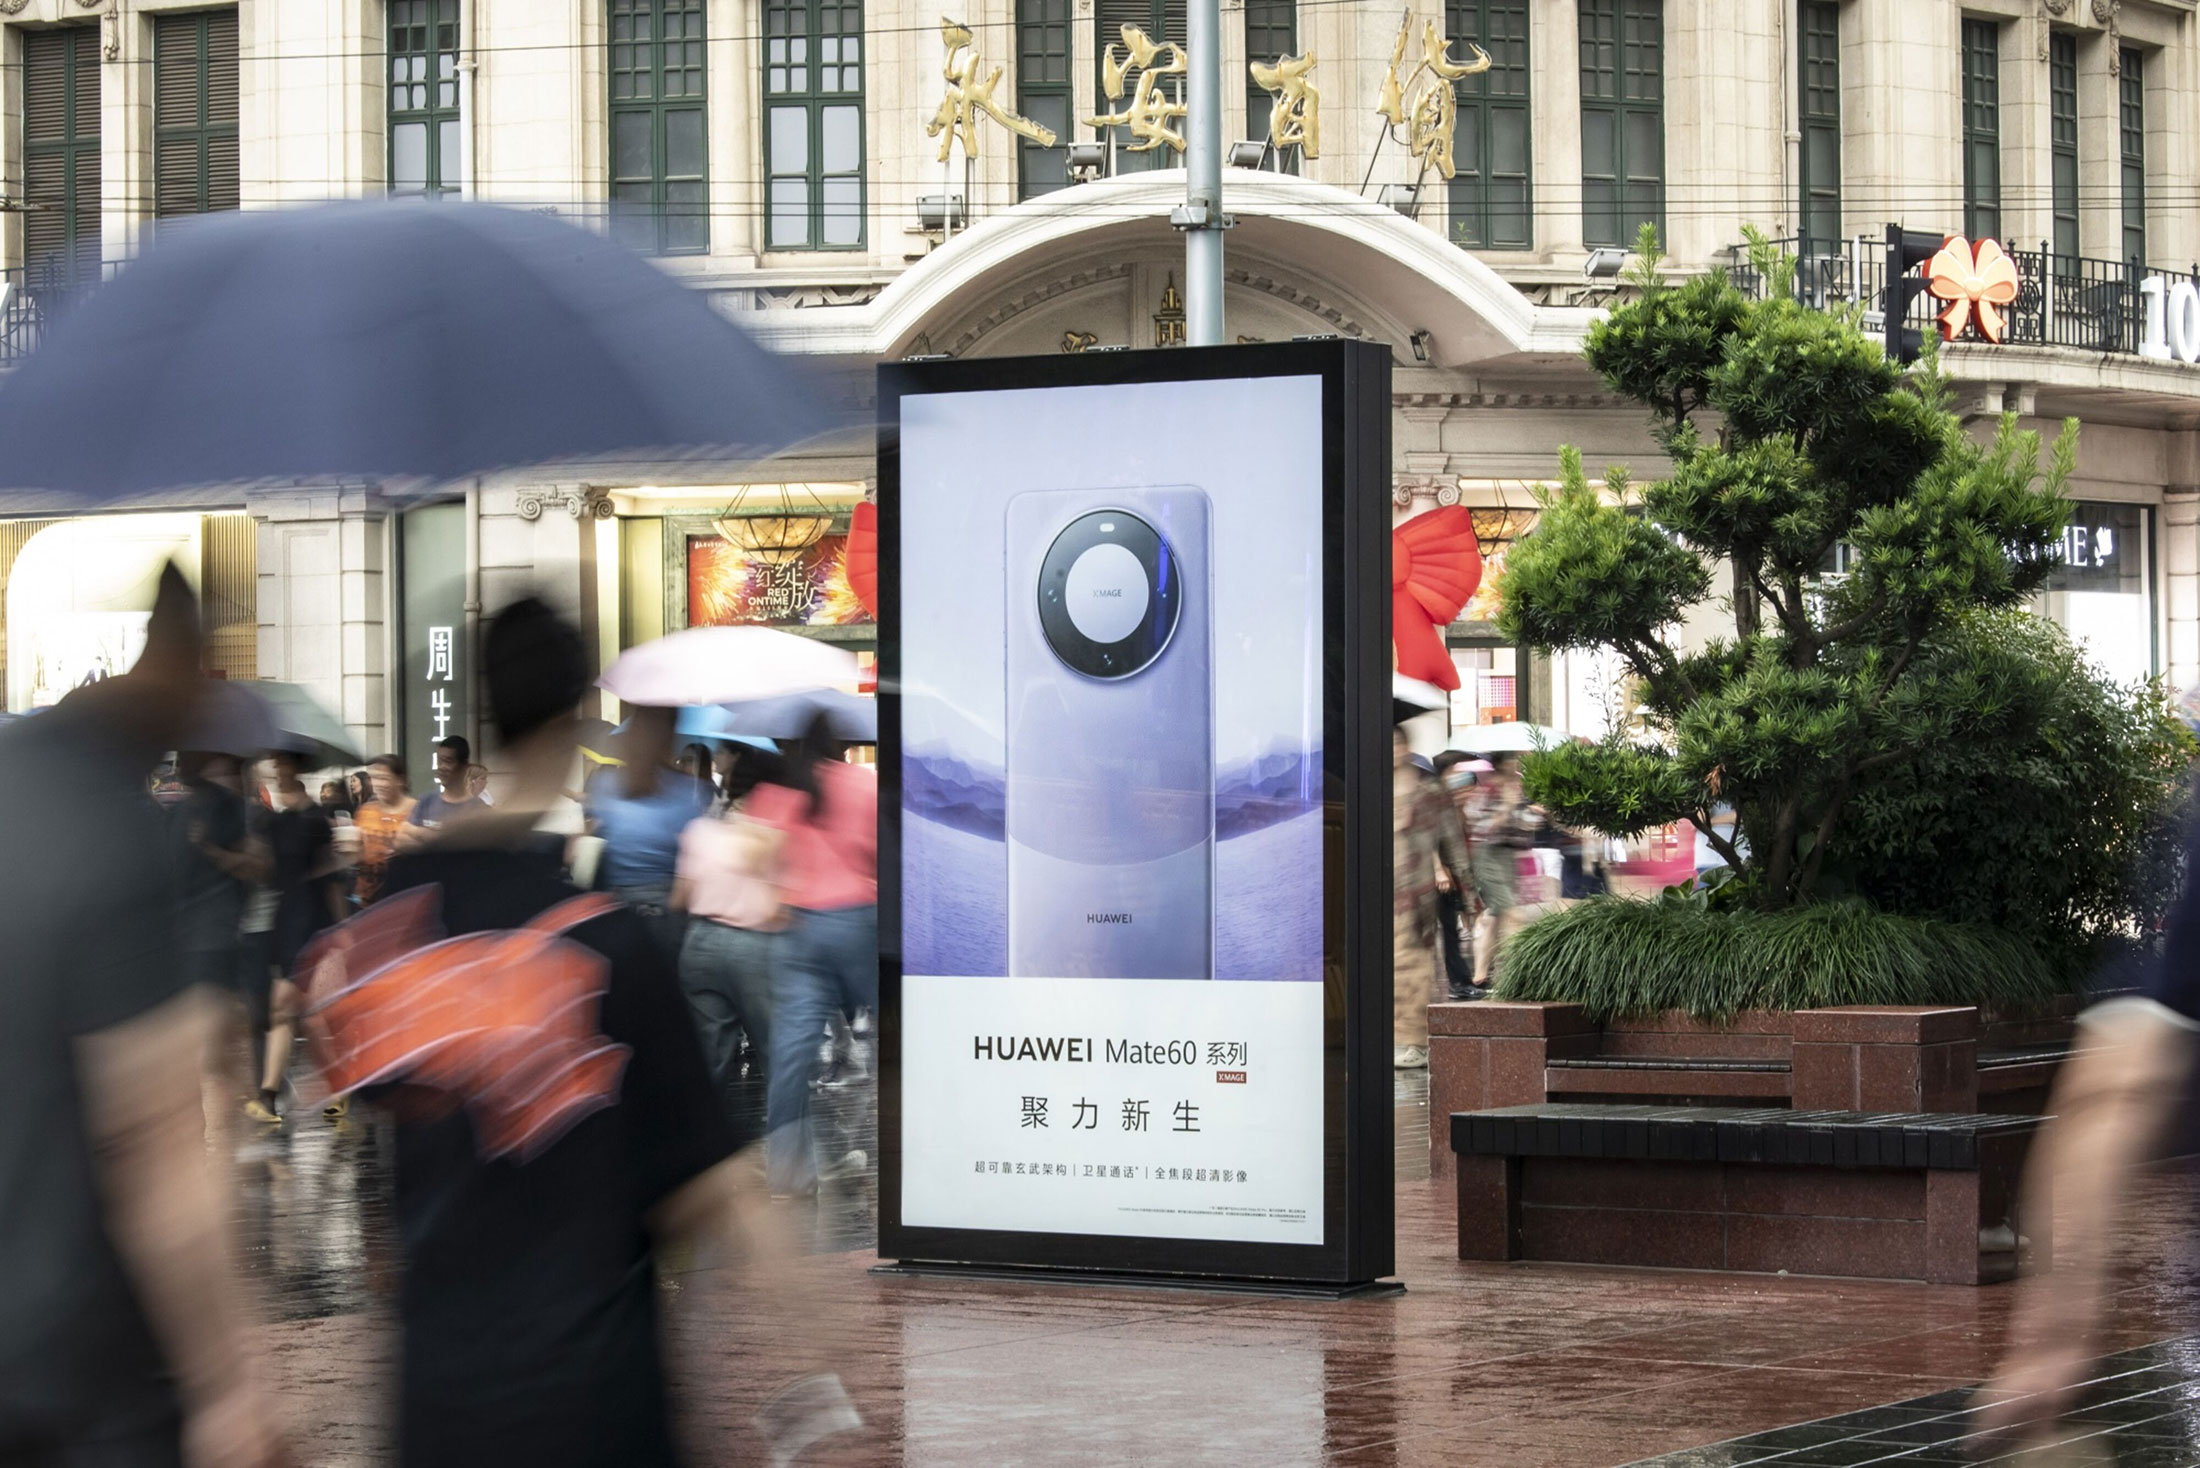 An ad for the Huawei’s Mate 60 in Shanghai.